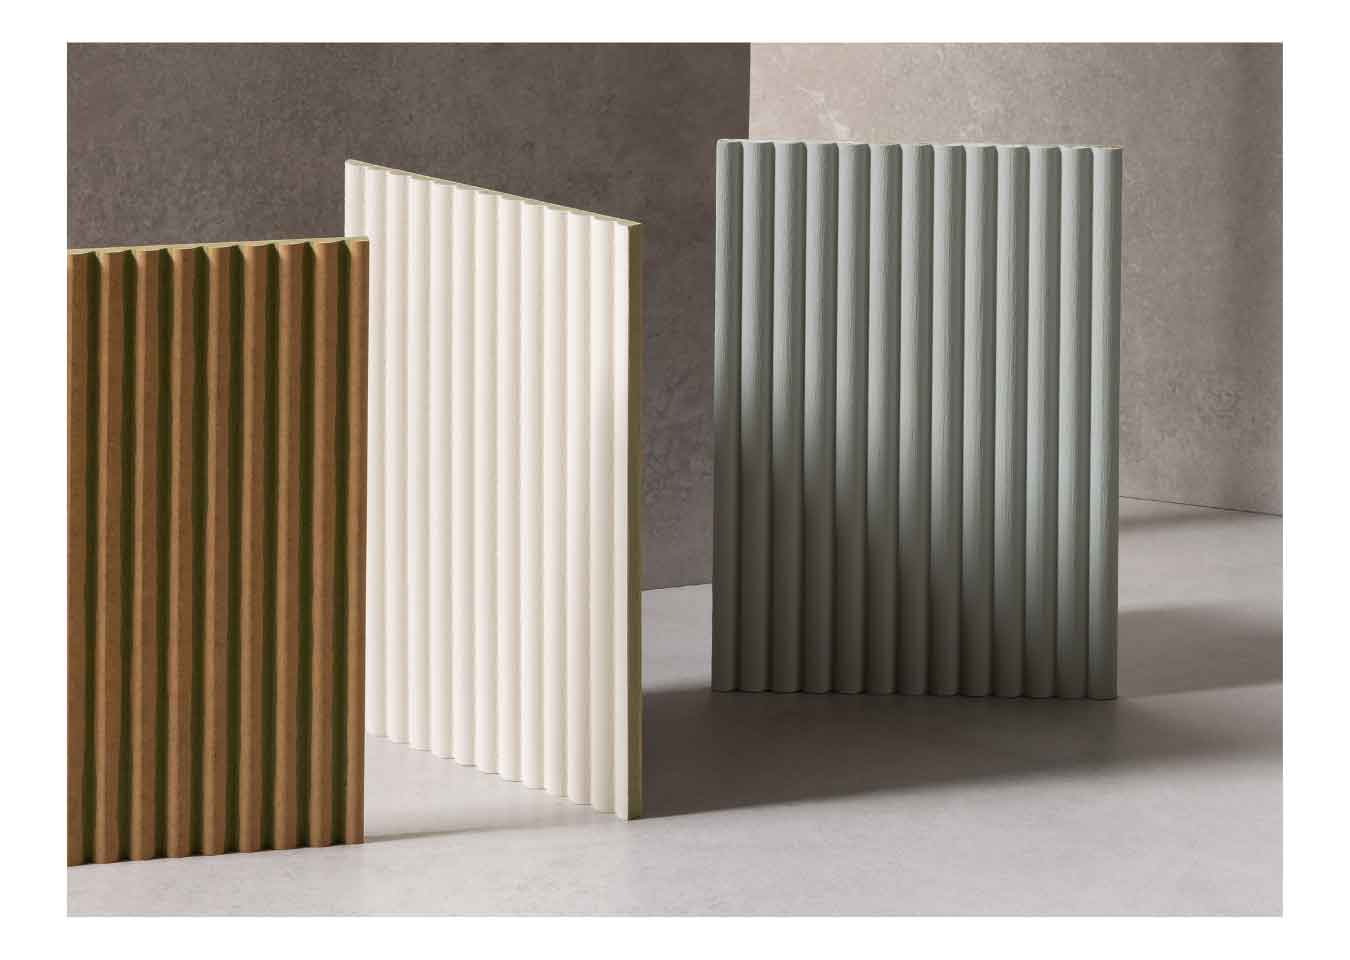 Unprimed, primed and painted Reeded Fine MDF wall panel samples.